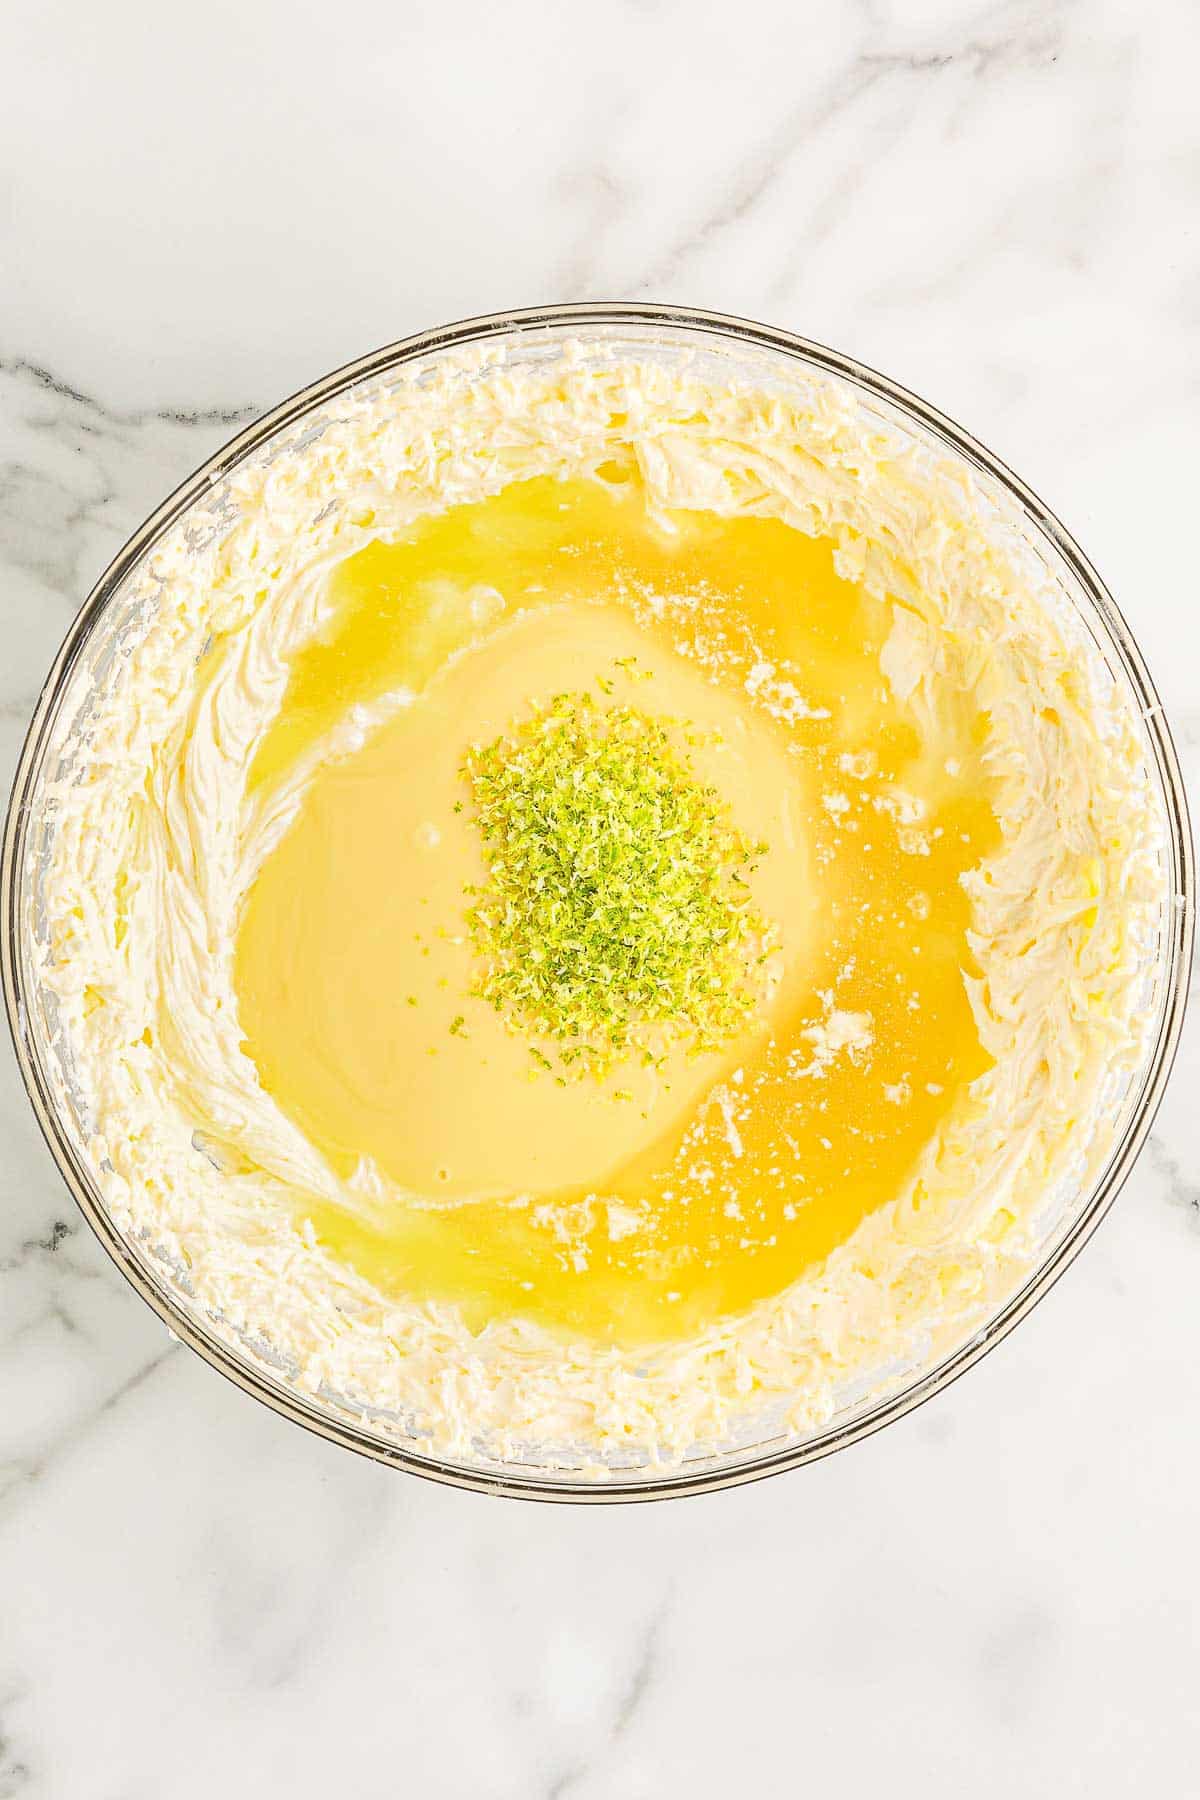 Condensed milk, lime juice, and zest added into whipped cream in a large glass mixing bowl.